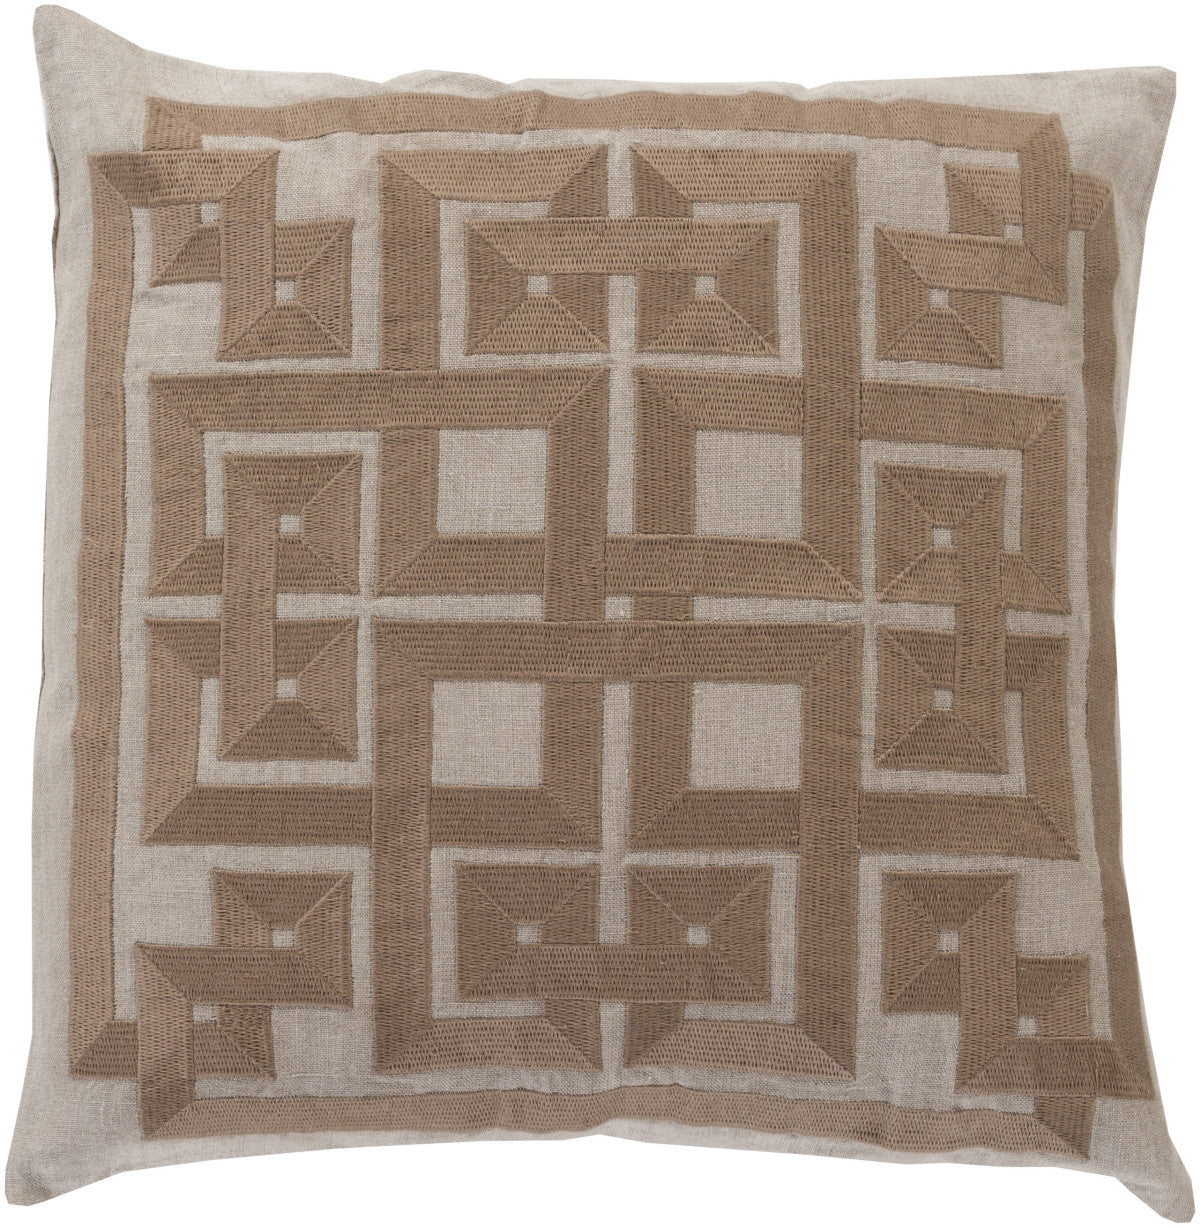 Surya Gramercy Intersected Geometrics LD-001 Pillow by Beth Lacefield